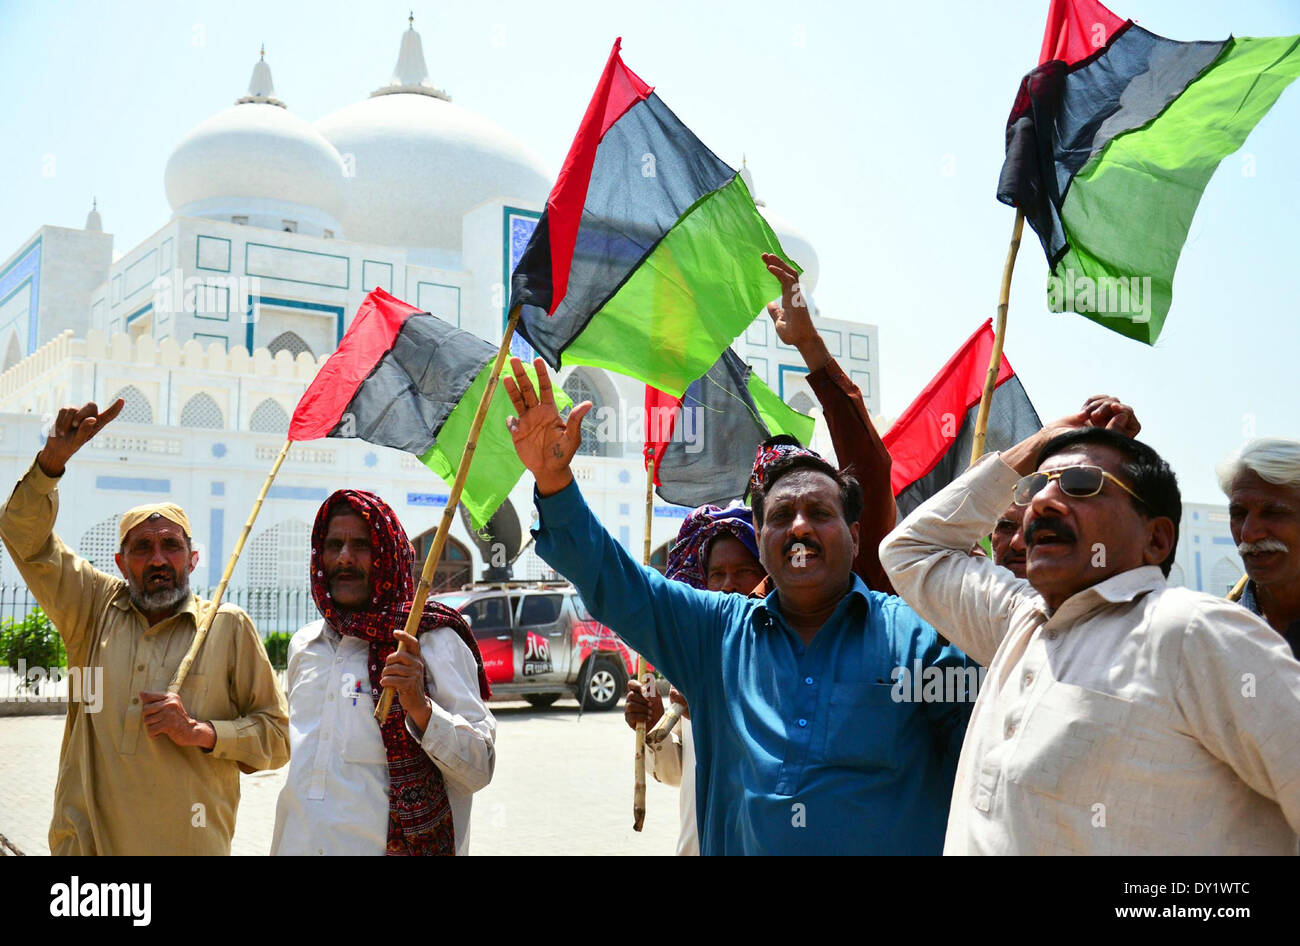 PPP activists chant slogans in front of Bhutto Mausoleum during the 35th death anniversary celebrations of PPP founder Zulfiqar Ali Bhutto, at Garhi Khuda Bux on Thursday, April 03, 2014. Credit:  Asianet-Pakistan/Alamy Live News Stock Photo